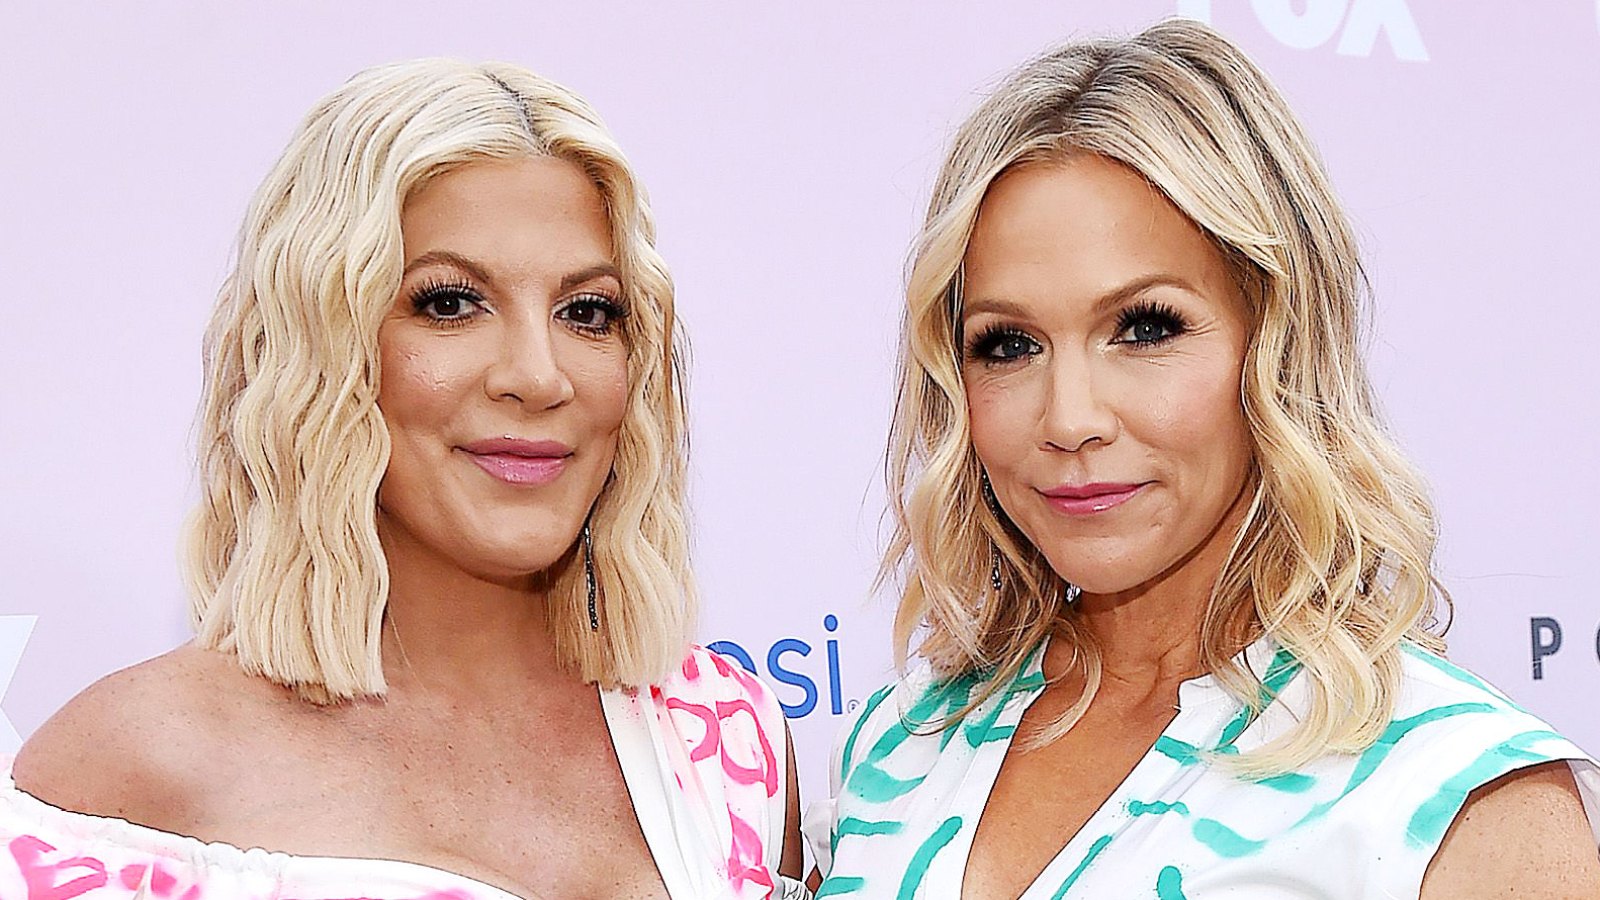 Tori Spelling Hasnt Been Asked to Join RHOBH But Jennie Garth Has